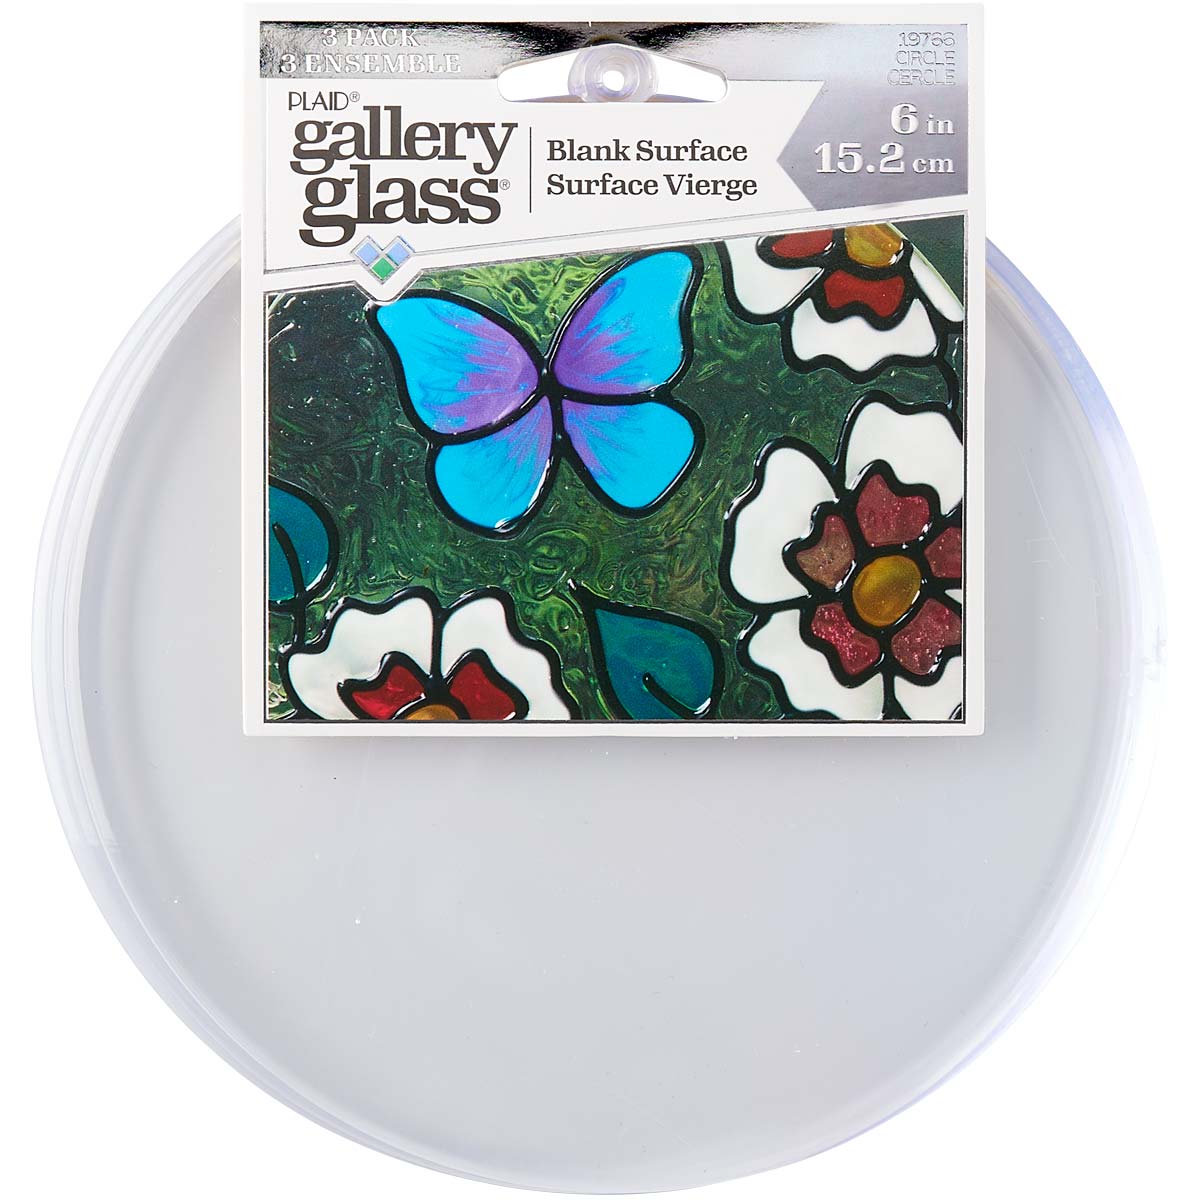 Shop Plaid Gallery Glass ® Surfaces - Large Oval - 19746 - 19746